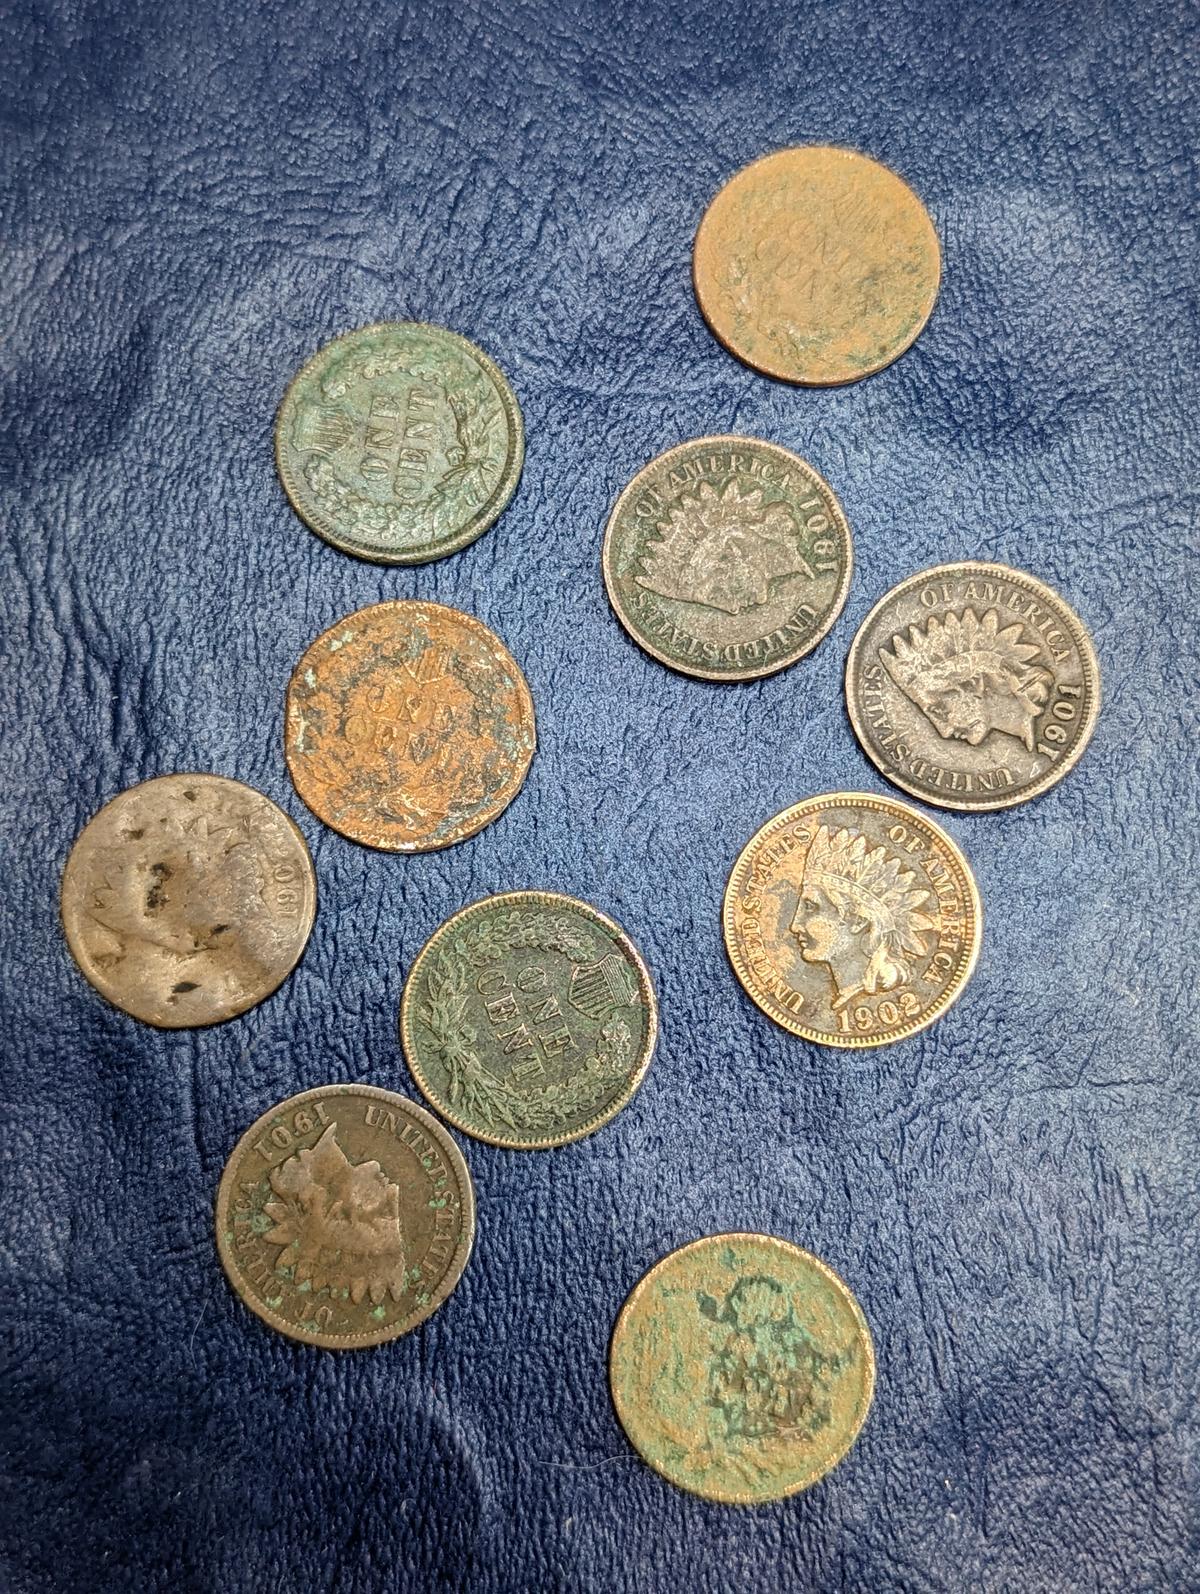 Assorted Indian Head Cent coins